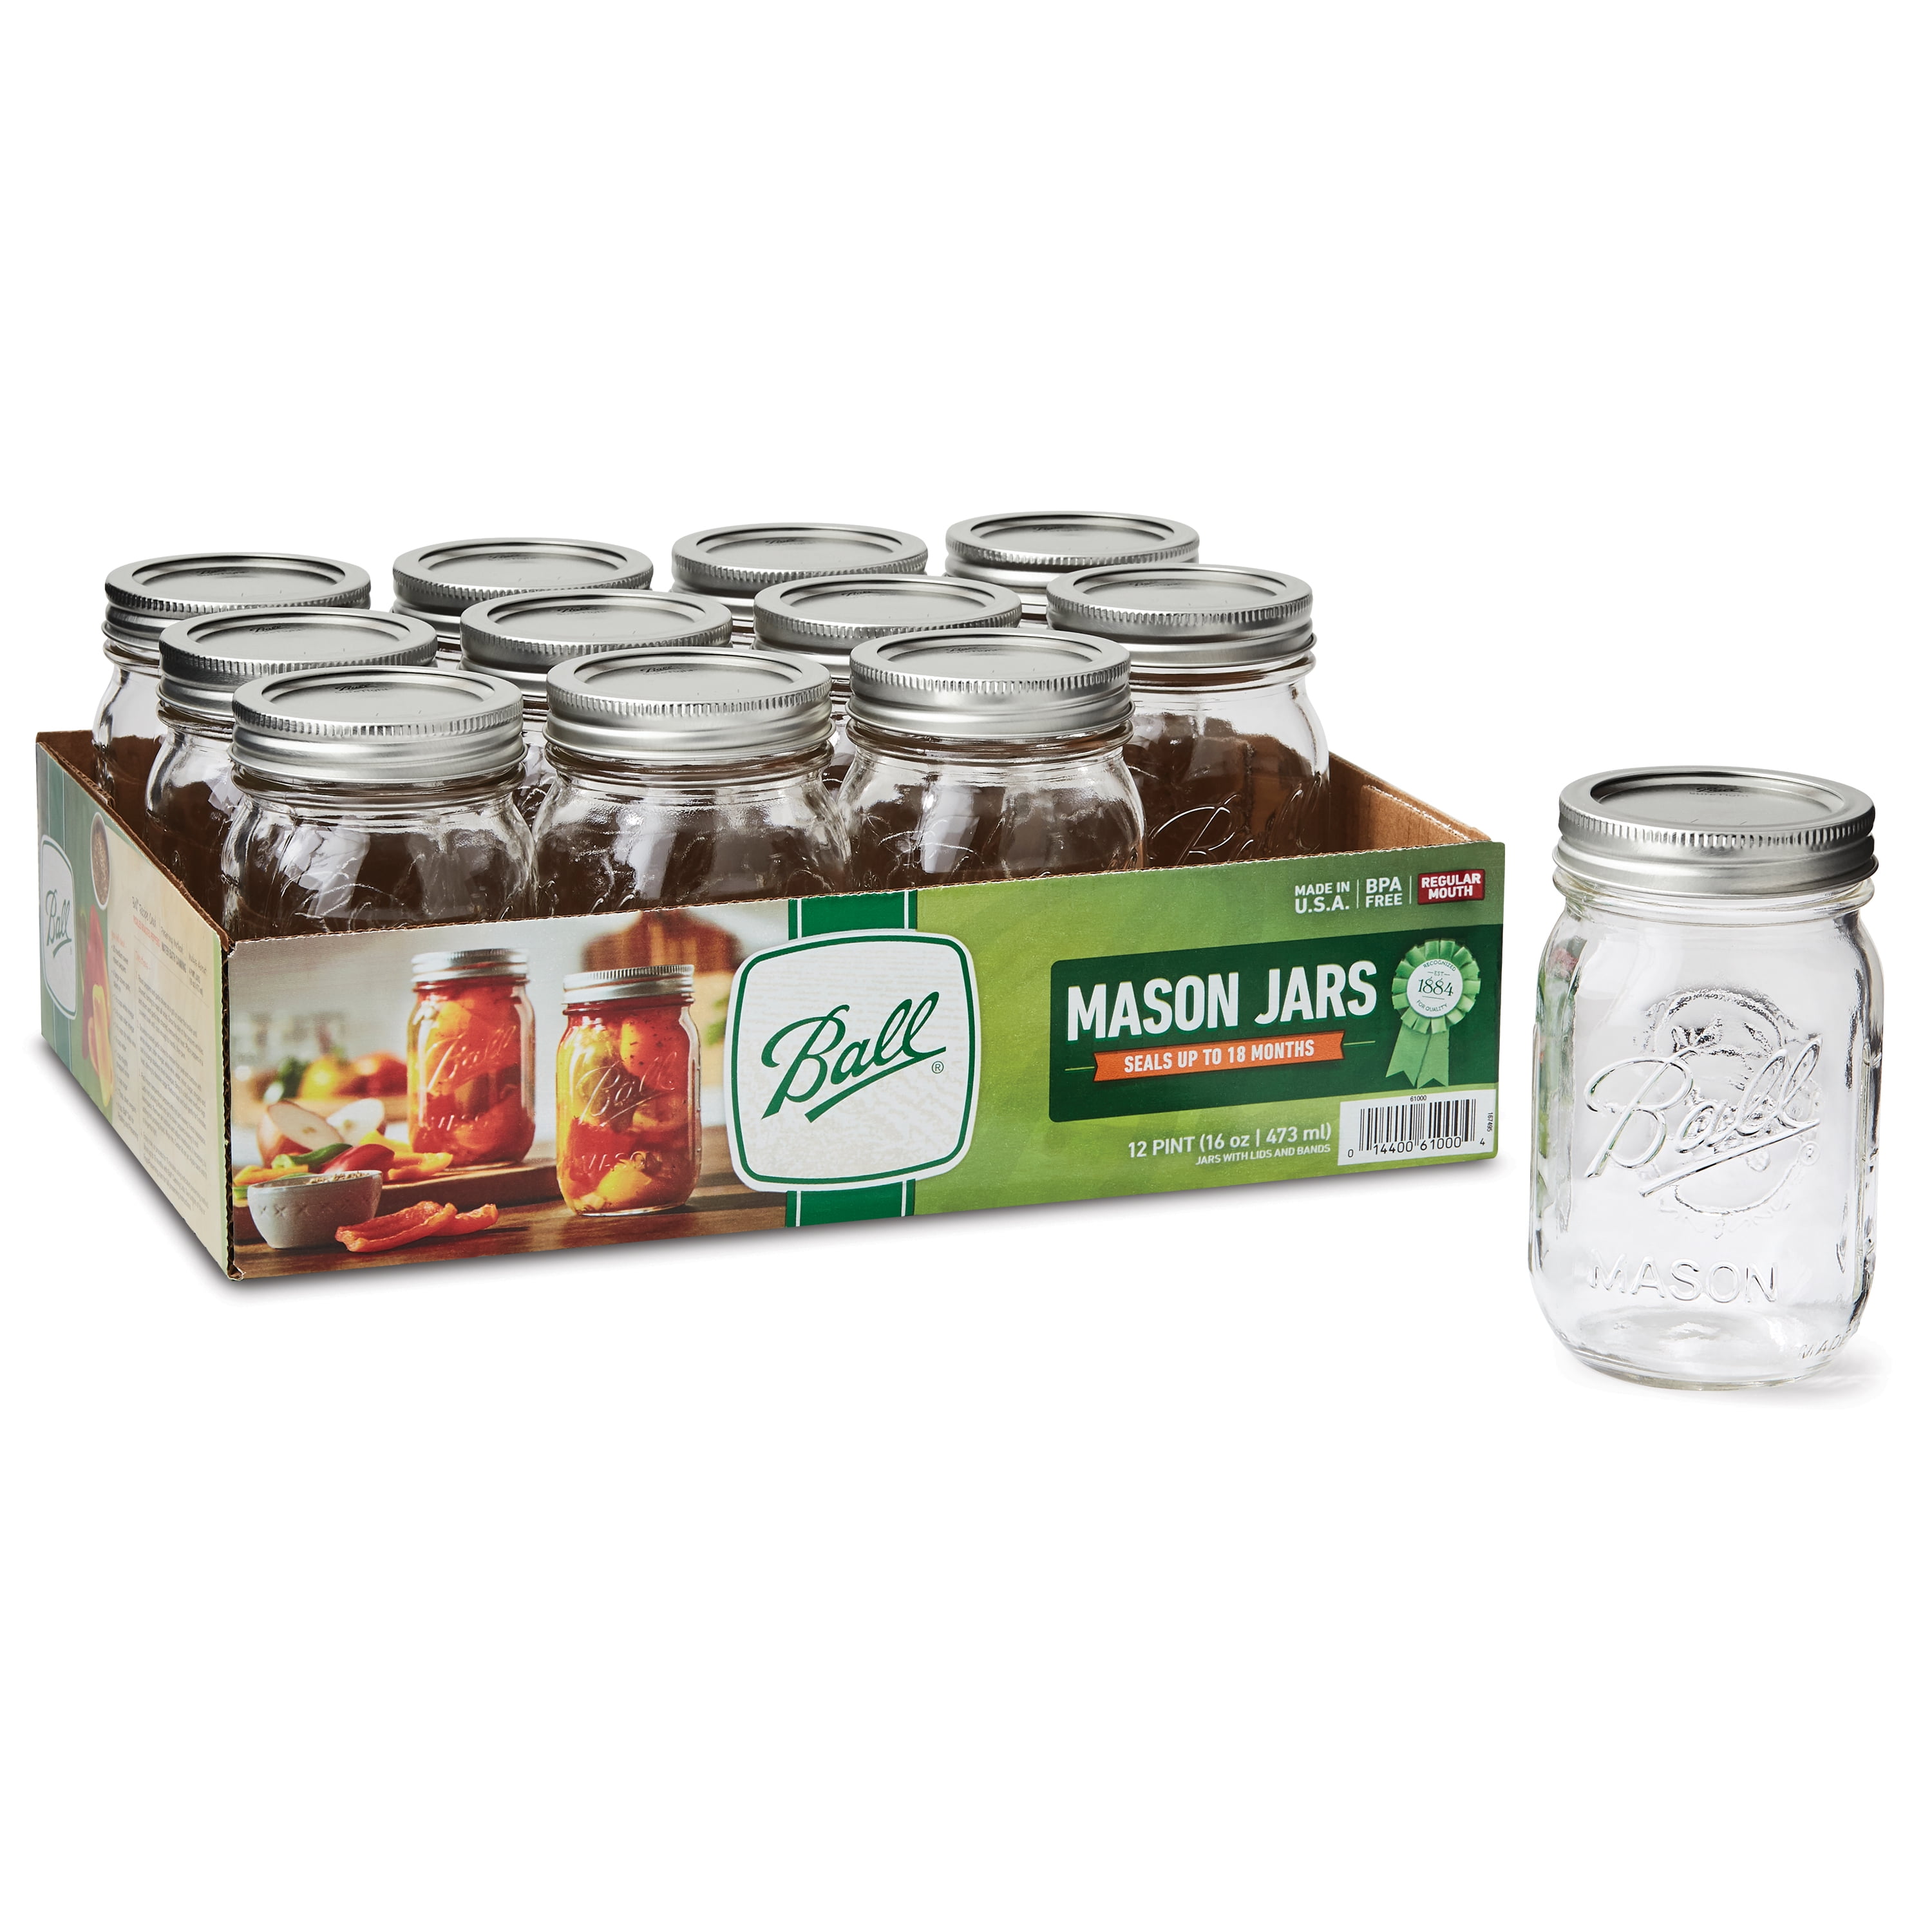 Buy Glass Mason Jar with Handle & Lid, 16 oz. (Pack of 12) at S&S Worldwide